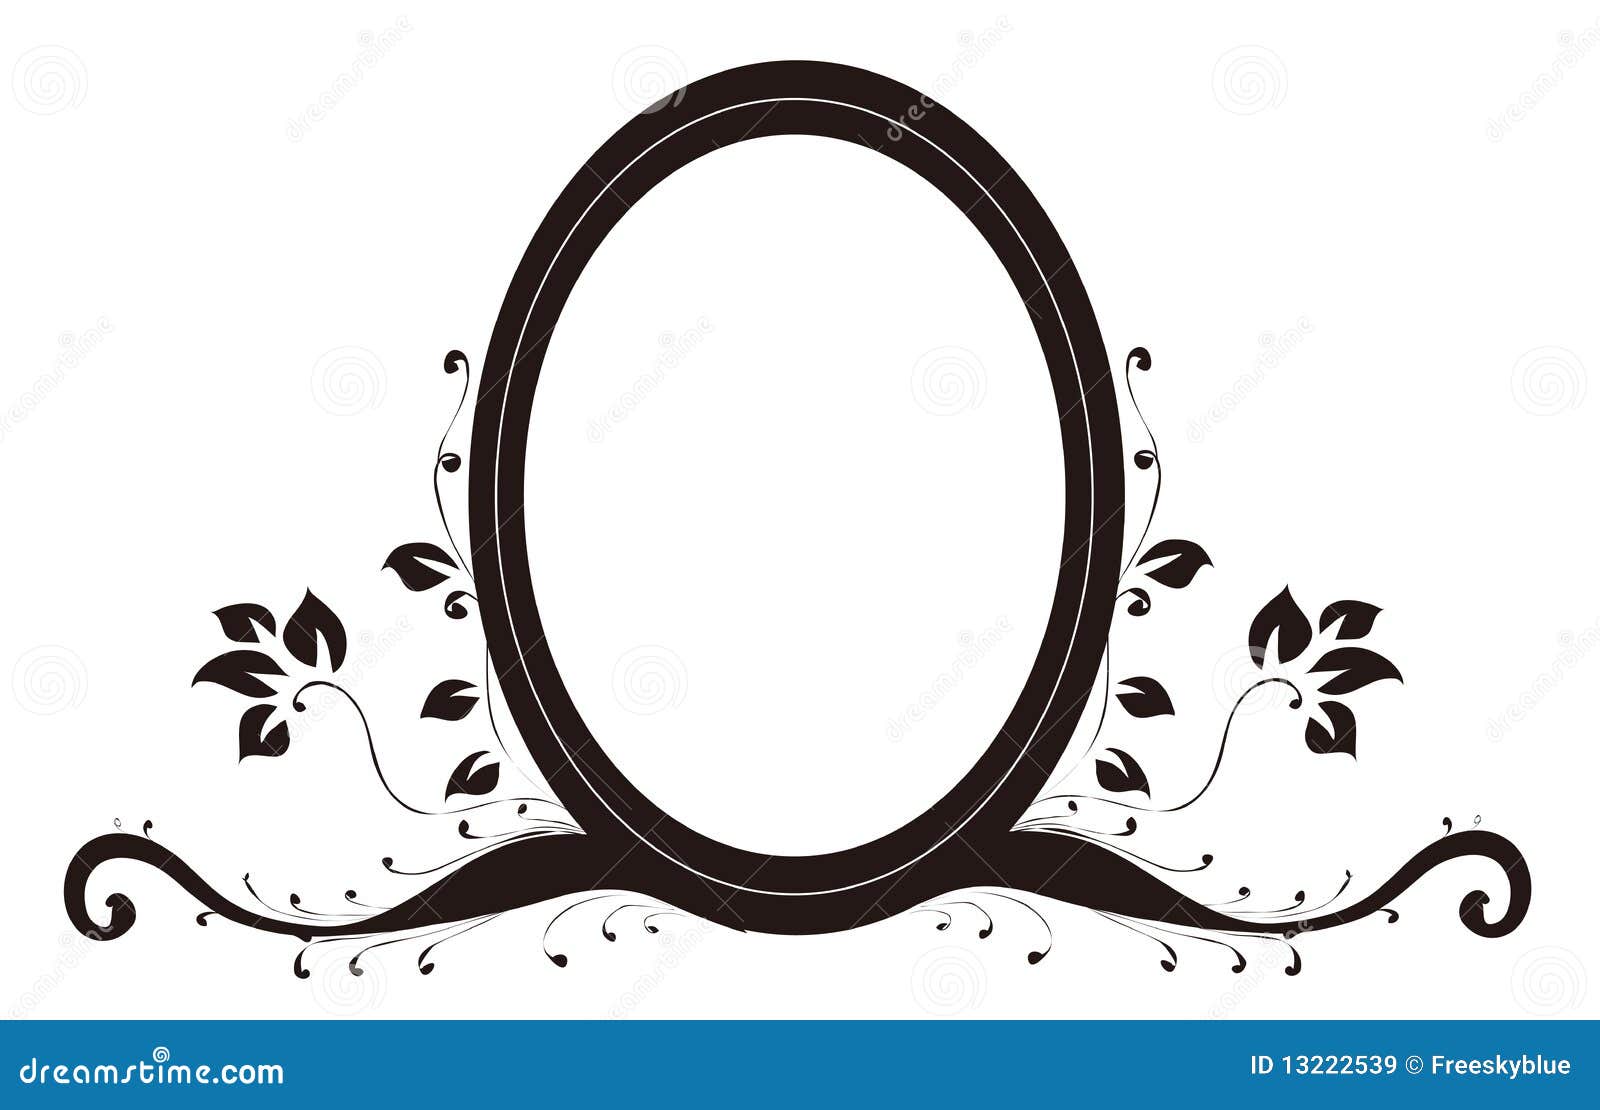 oval mirror and lotus